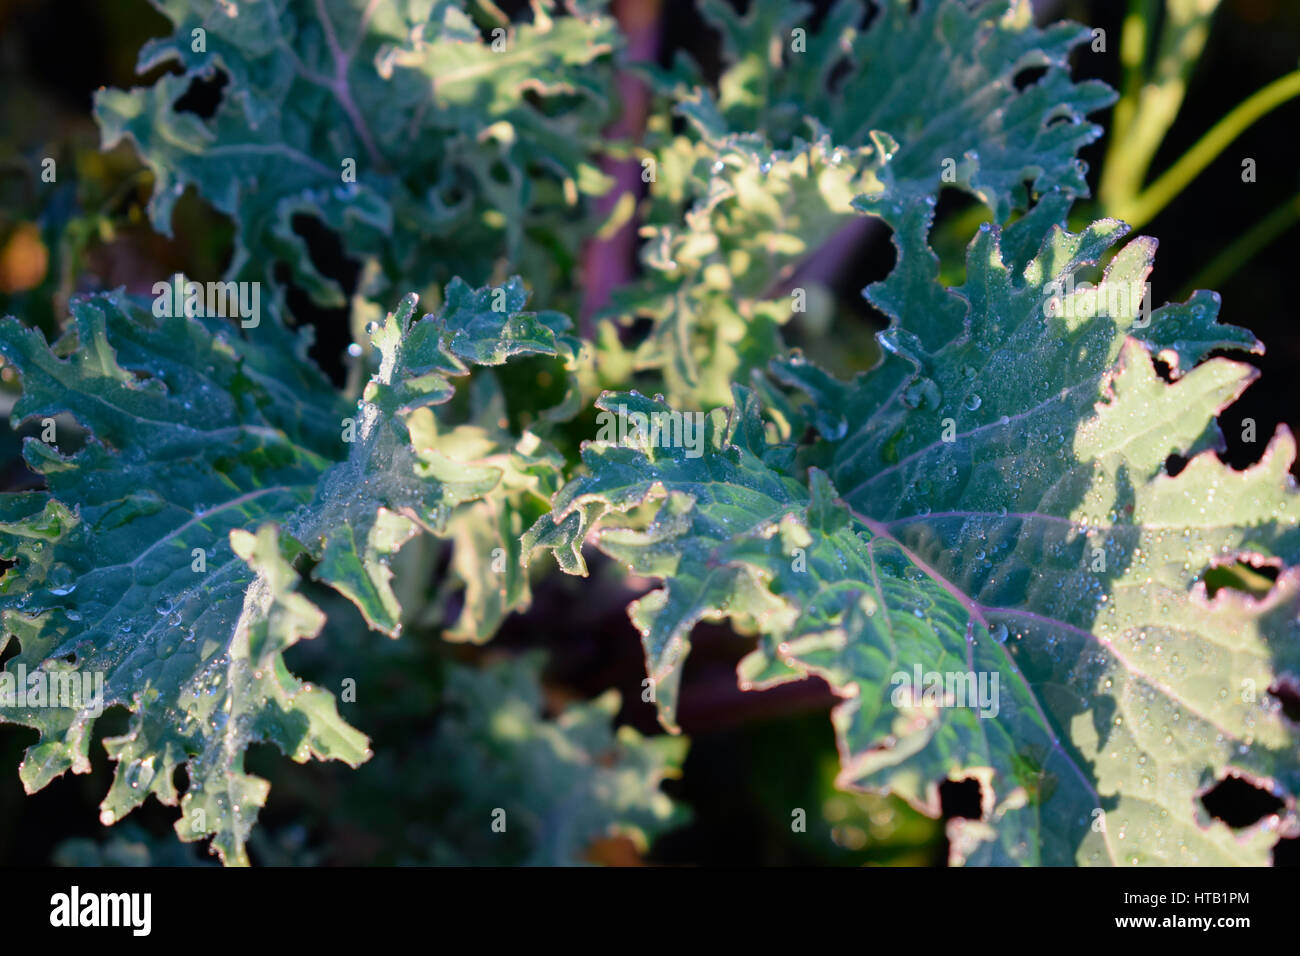 Red Russian kale Stock Photo